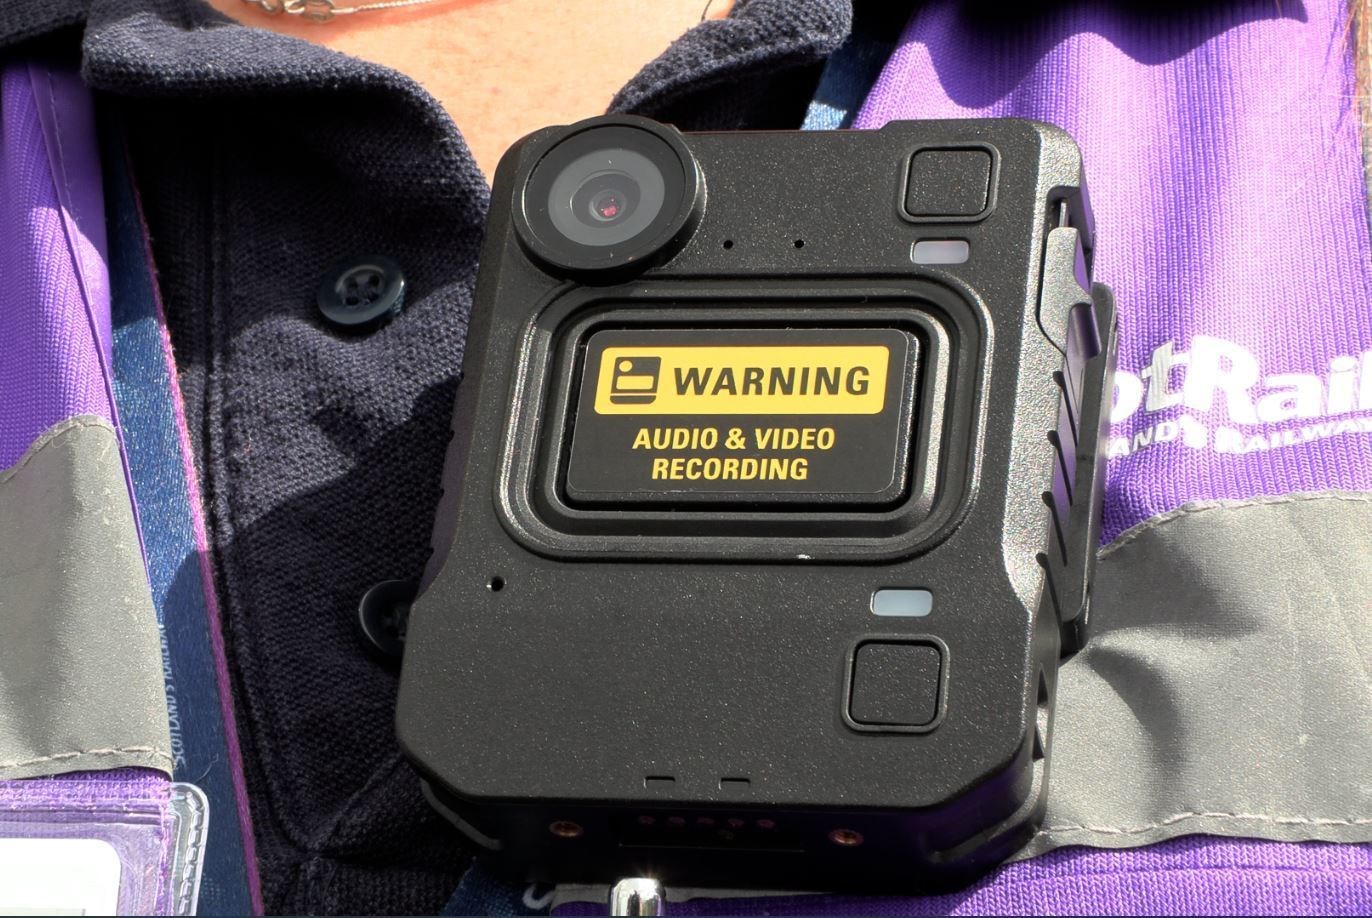 Every member of staff will be able to have a body cam on Scotland's Railway if they want one.